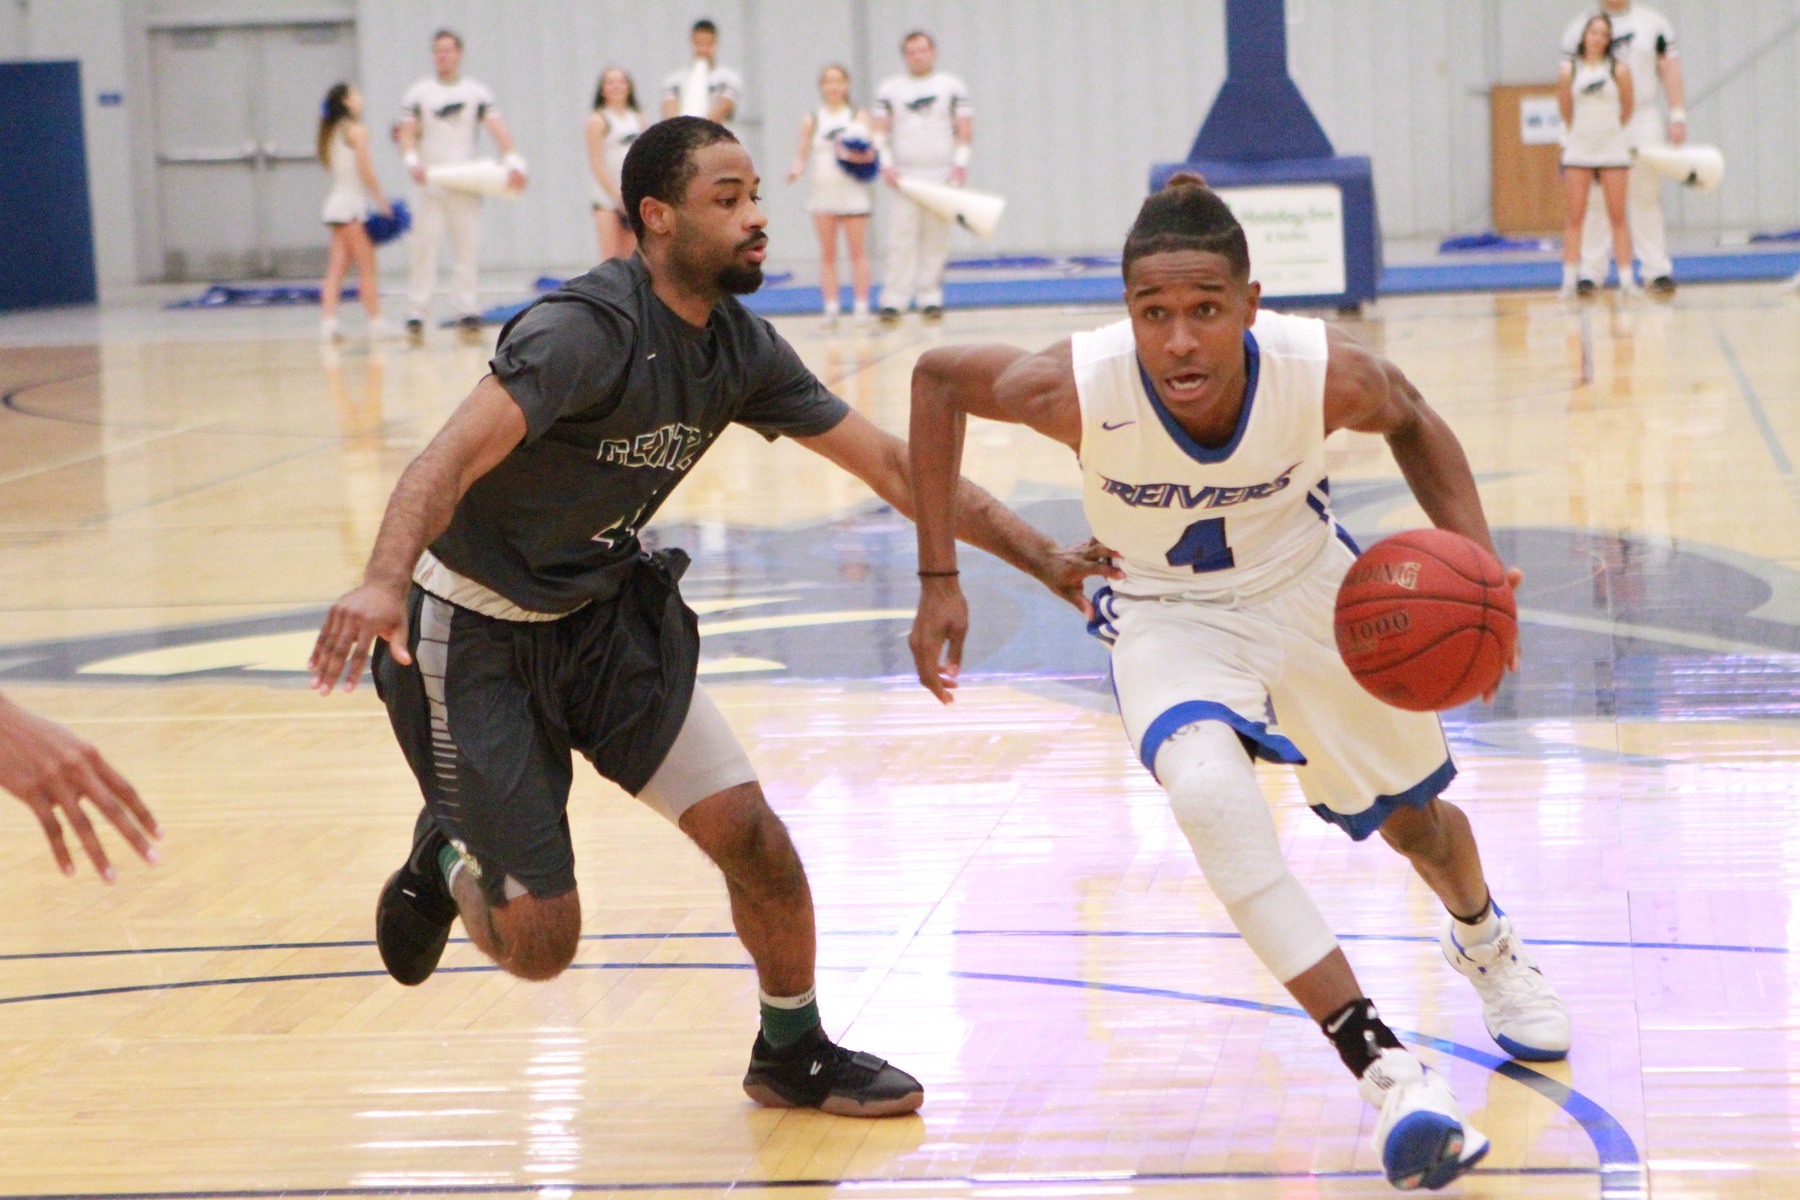 Shadeed Shabazz scored all 13 of his points in the second half as Iowa Western overcame a late 13 point deficit to beat North Platte 76-72 at Reiver Arena.